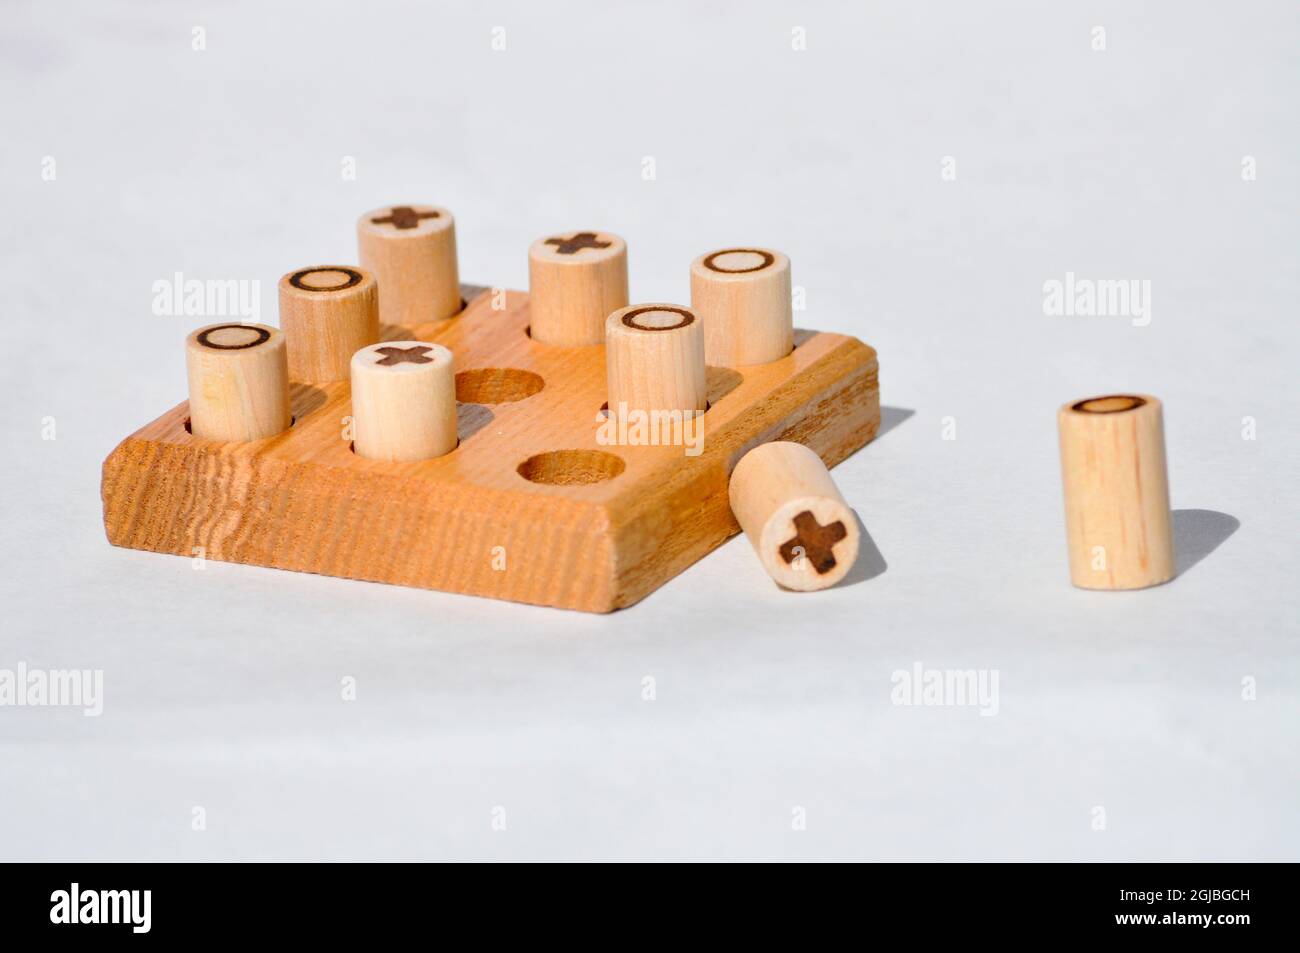 A handcrafted, wooden noughts and crosses set. Pegs are made from dowels of wood with the symbol burnt on. and the board has 9 holes drilled out. Stock Photo